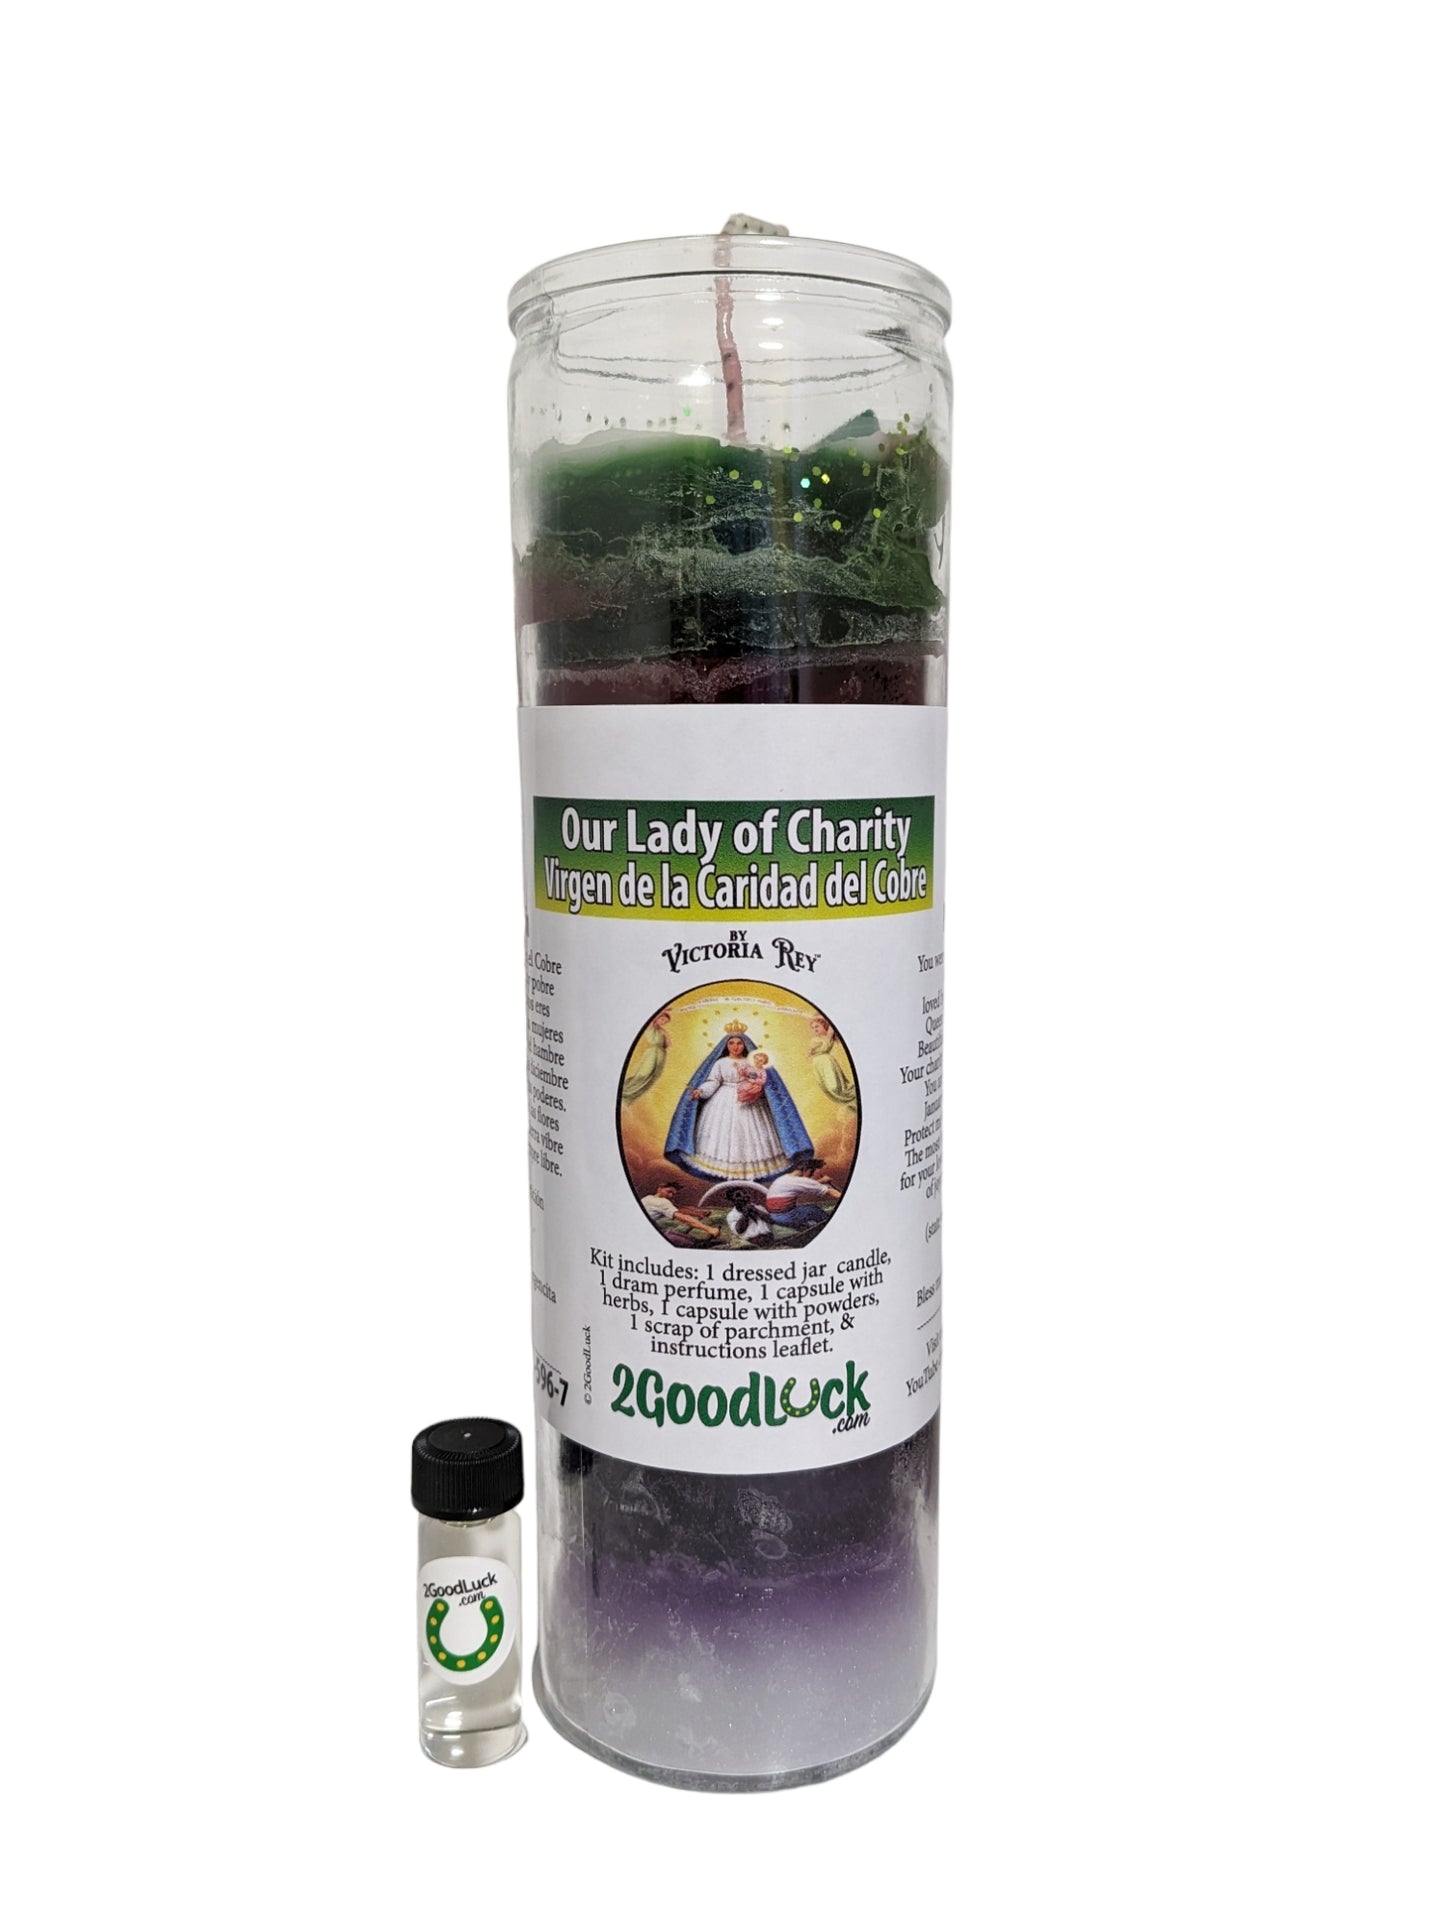 Our Lady of Charity 7 Colors Dressed Candle Kit - Caridad del Cobre 7 Colores